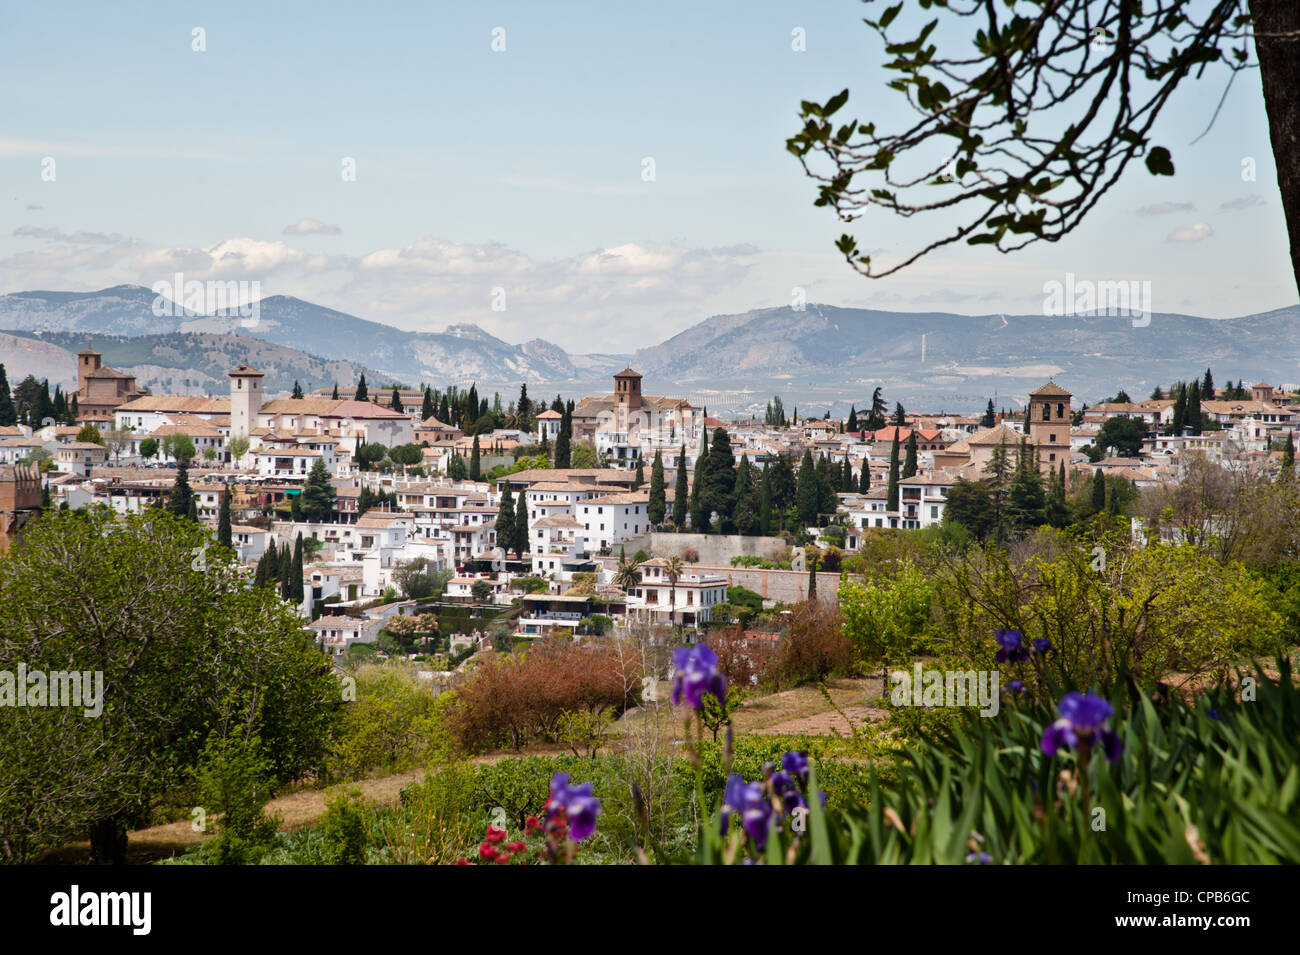 The whitewashed houses of the city of Granada rise among flowers, trees, and mountains of the Andalusia region of southern Spain Stock Photo